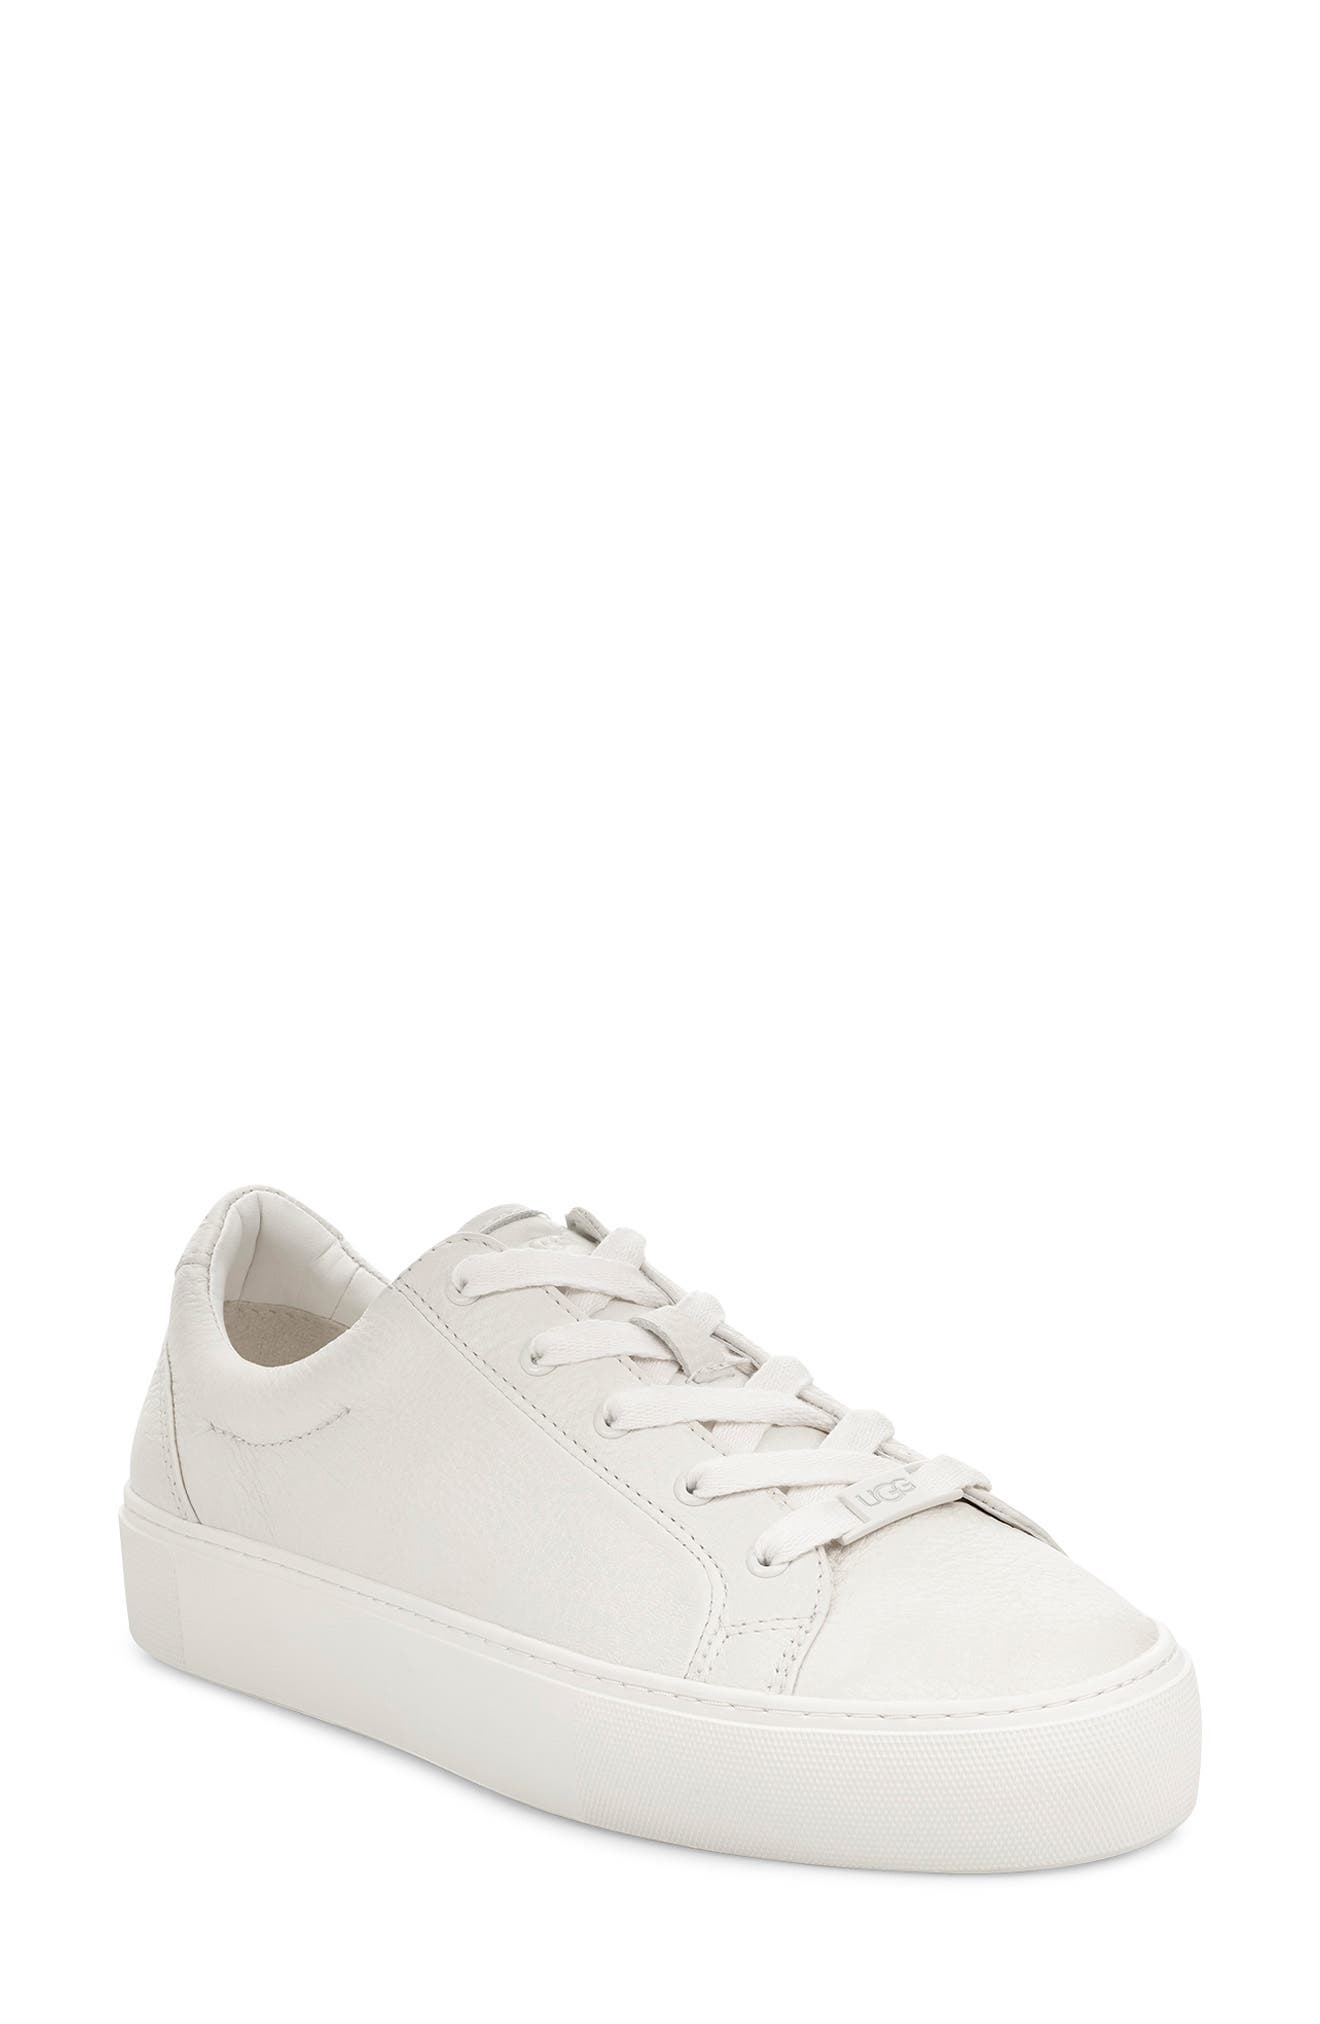 ugg white tennis shoes